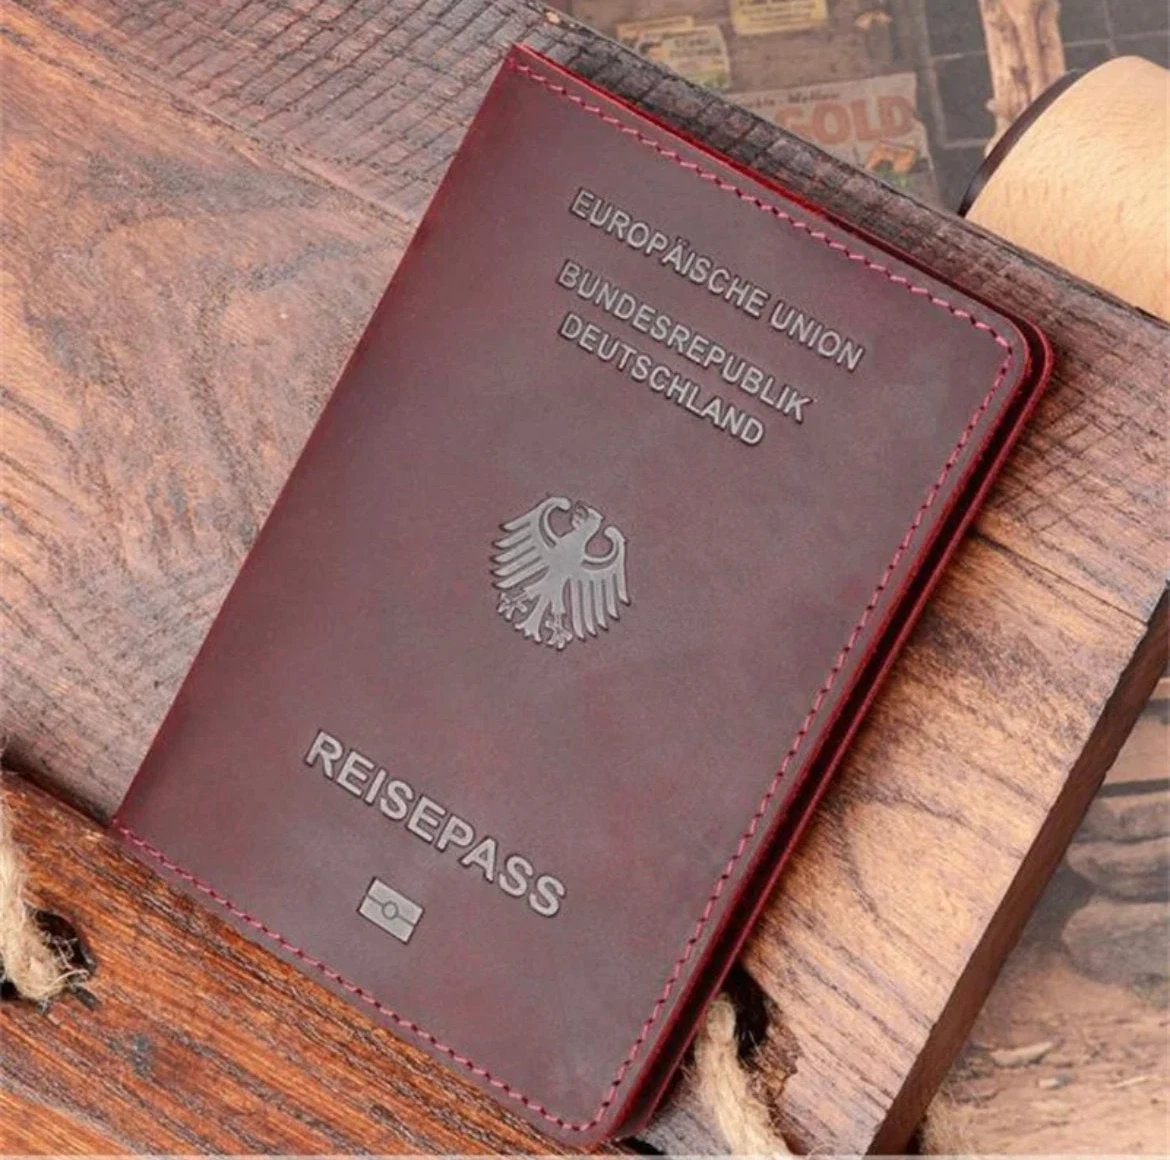 India's Best Passport Protective Leather Cover 2023